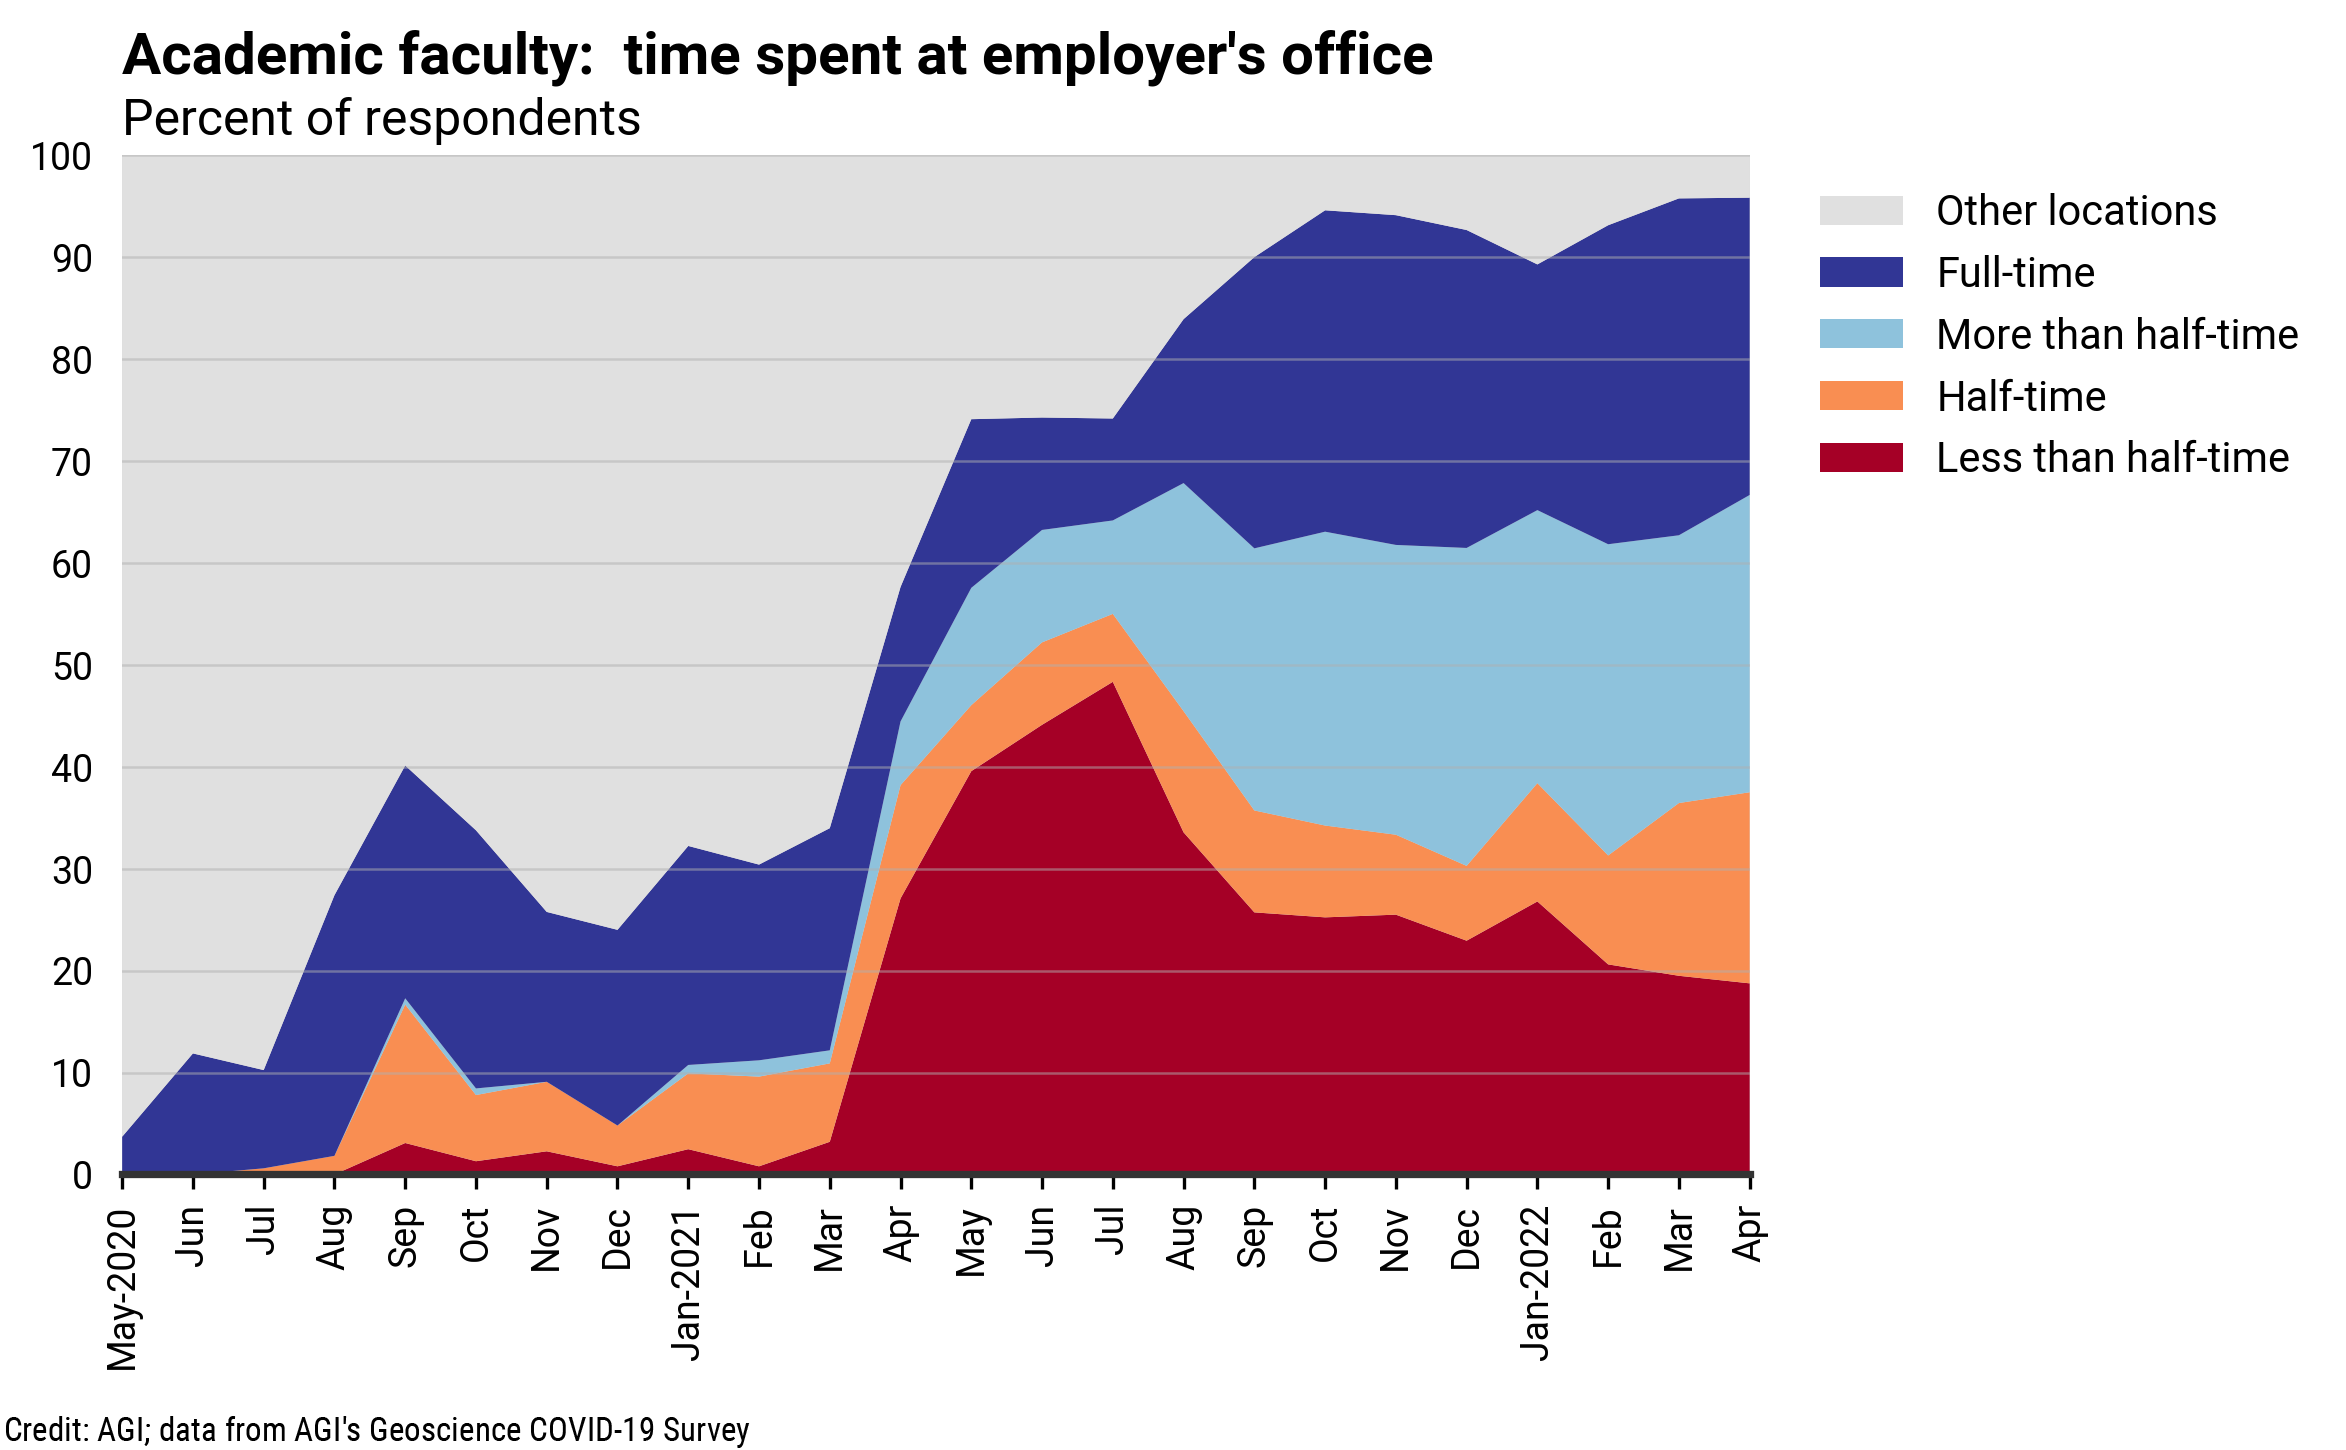 DB_2022-006 chart 03: Academic faculty: time spent at employer&#039;s office (Credit: AGI; data from AGI&#039;s Geoscience COVID-19 Survey)